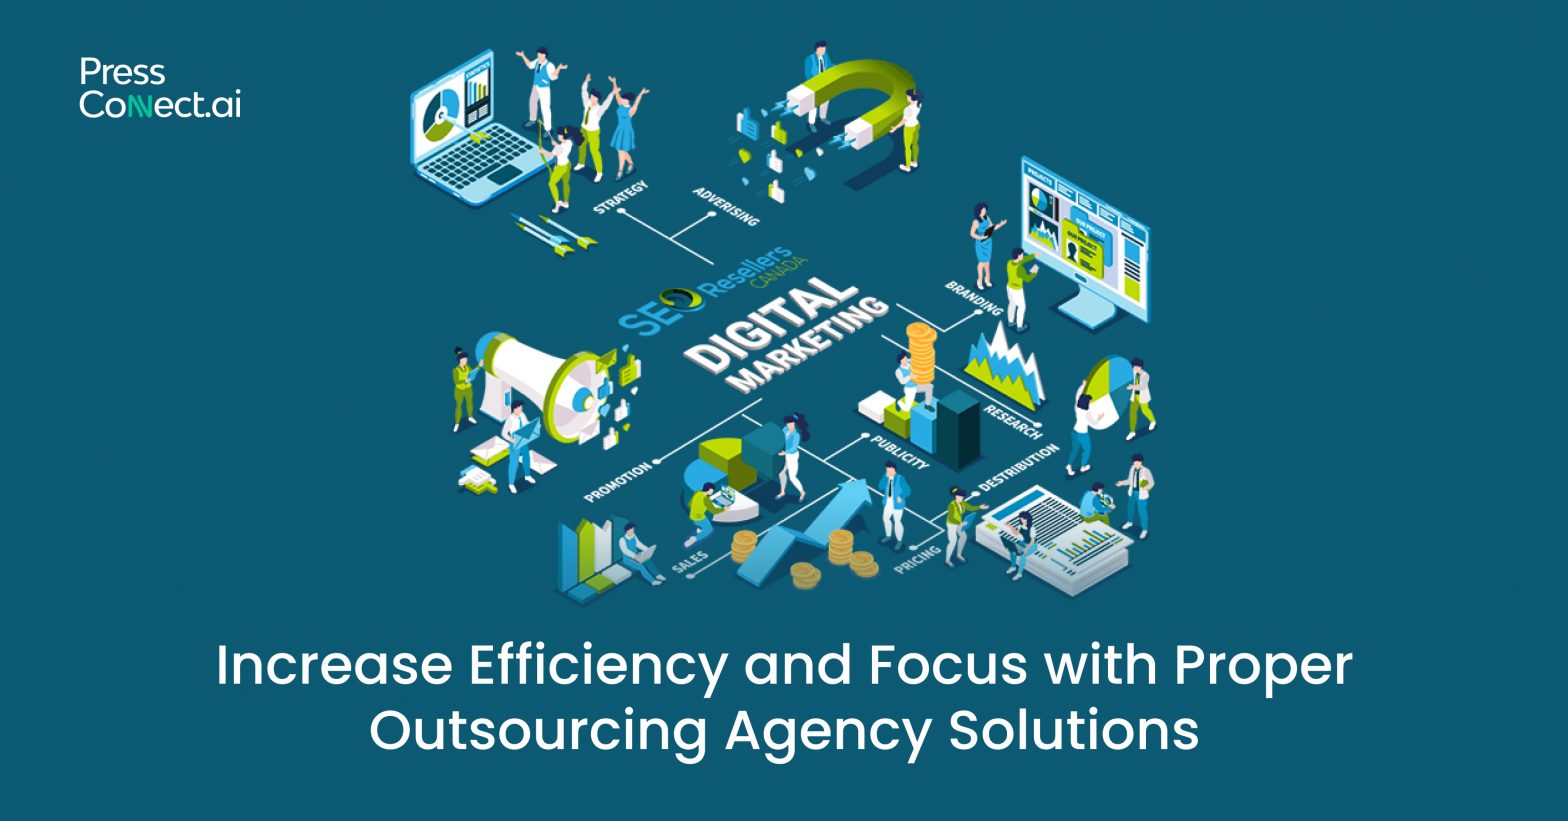 Outsourcing Agency Solutions